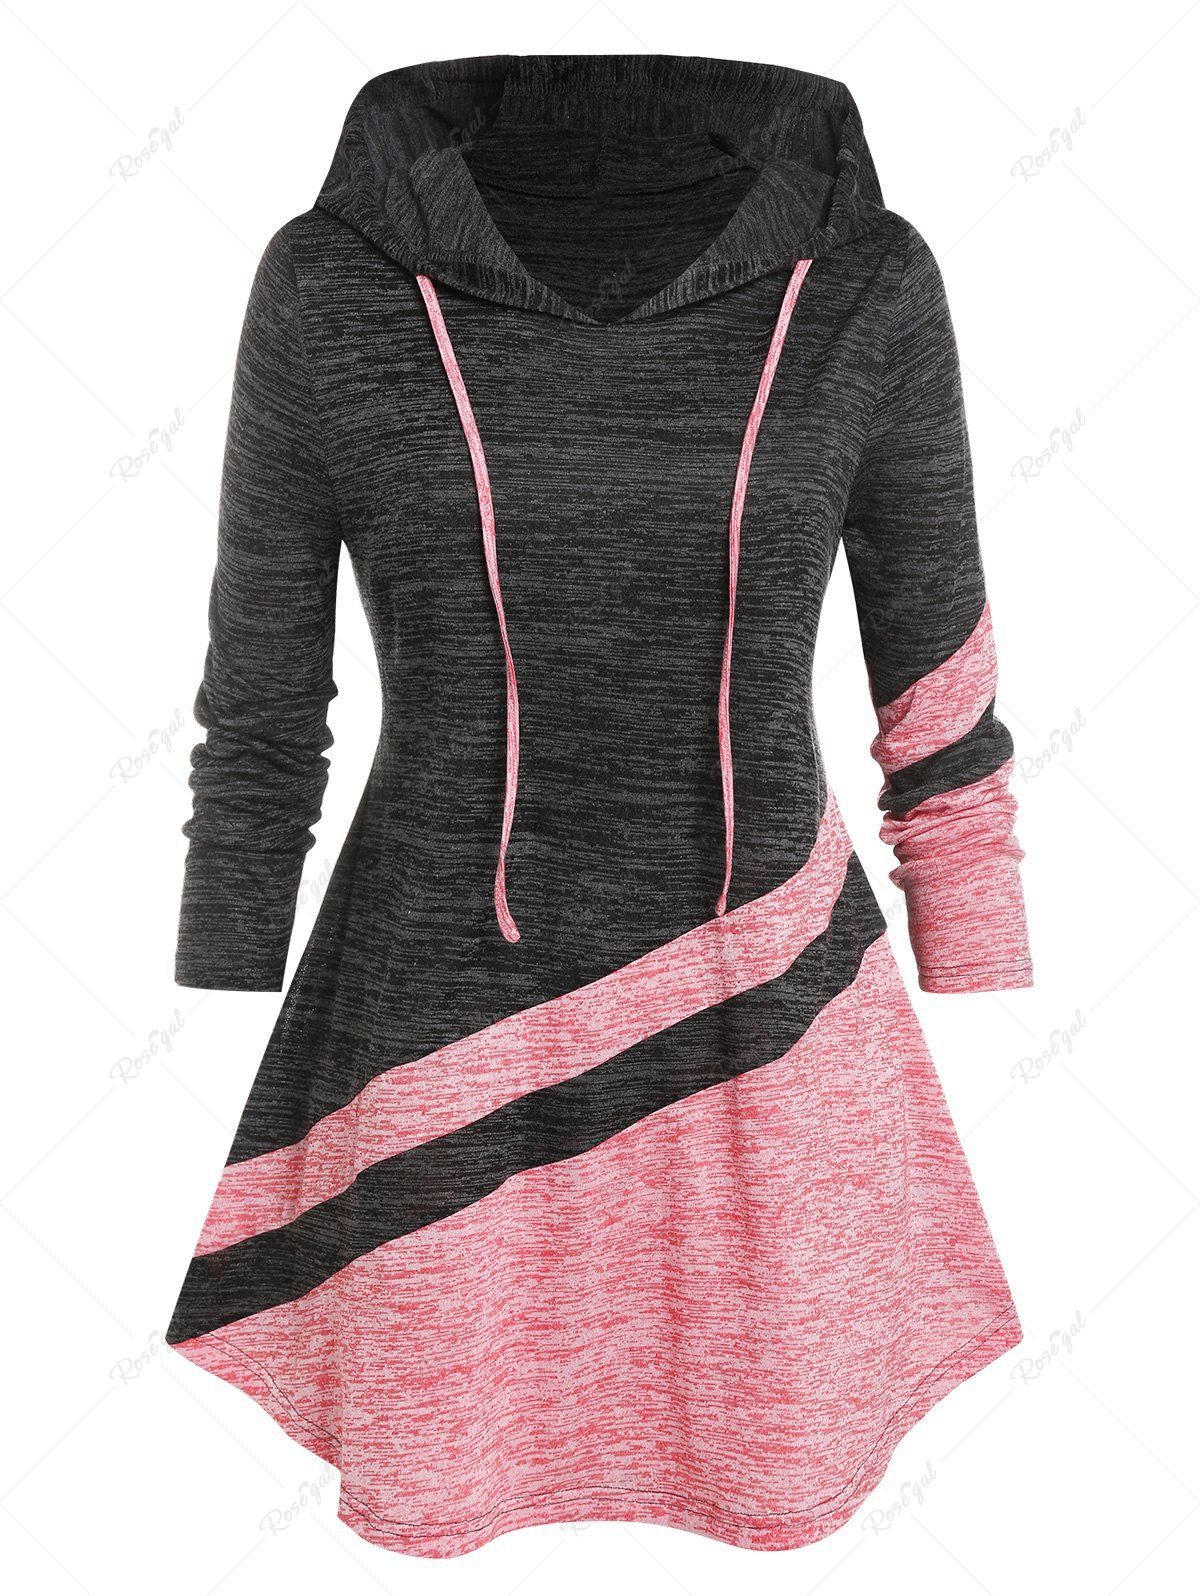 Discount Plus Size Hooded Space Dye Colorblock Tee  